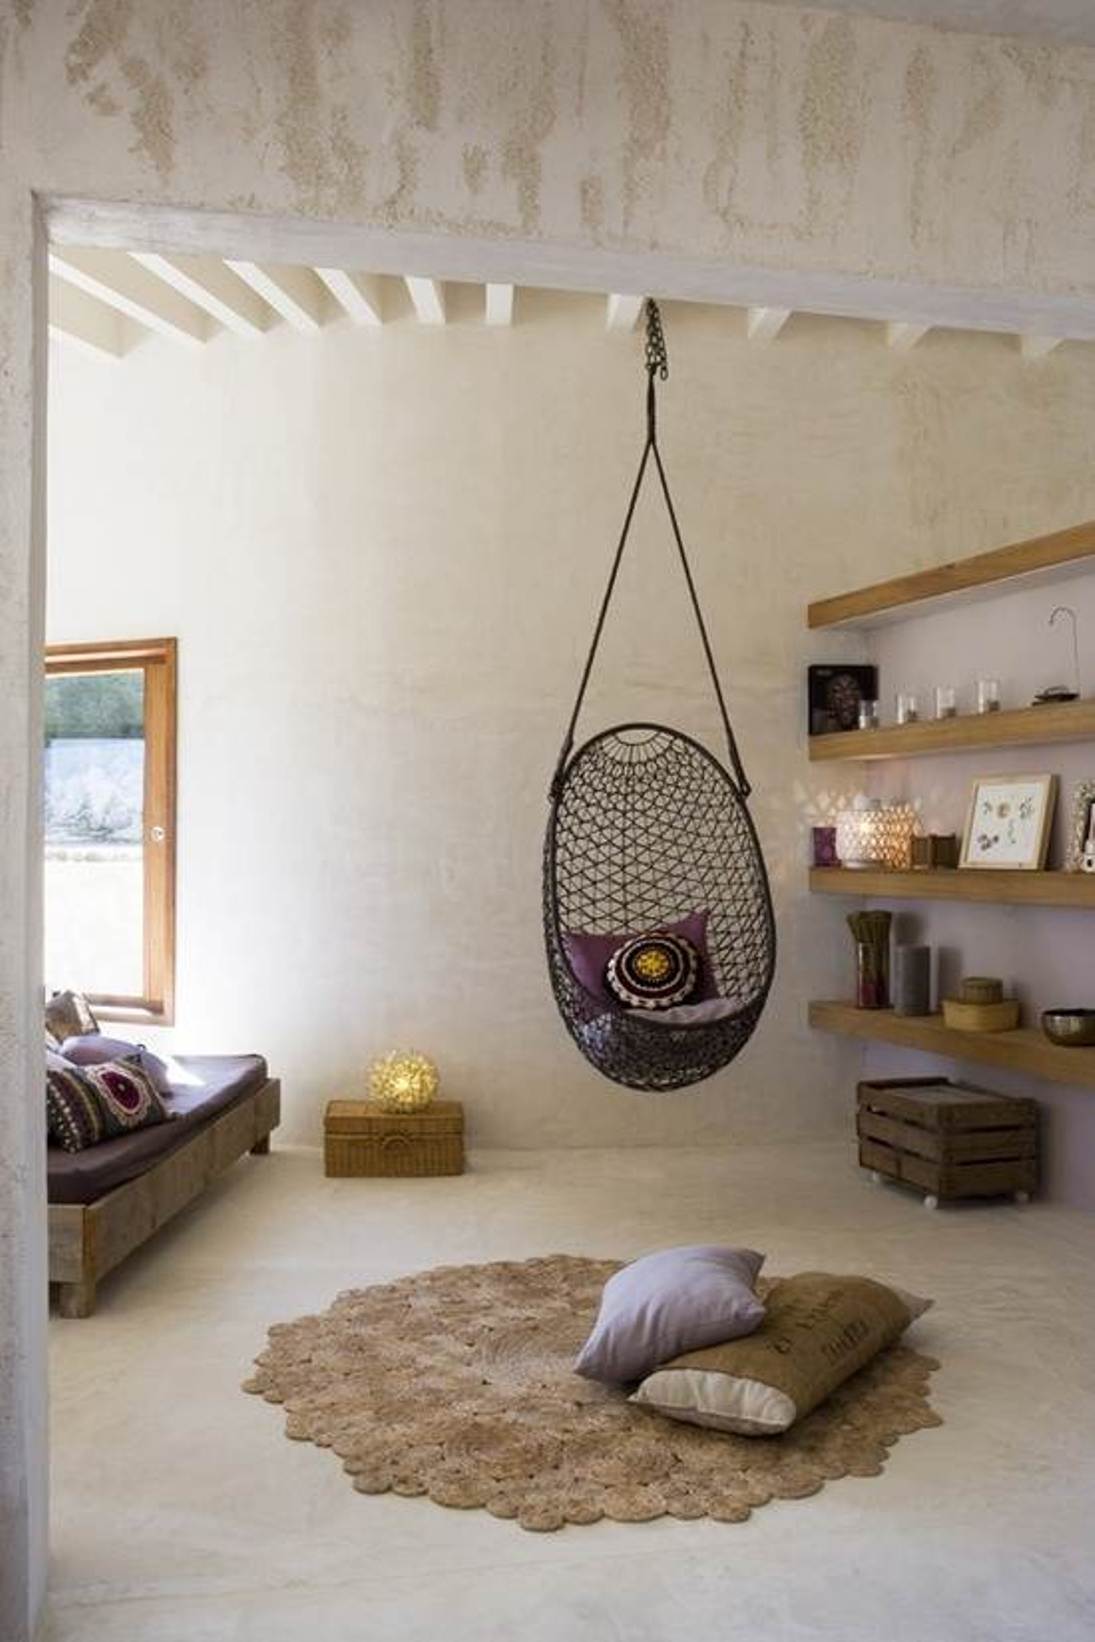 Charming Home Furniture Ideas with Chairs That Hang from the Ceiling HomesFeed